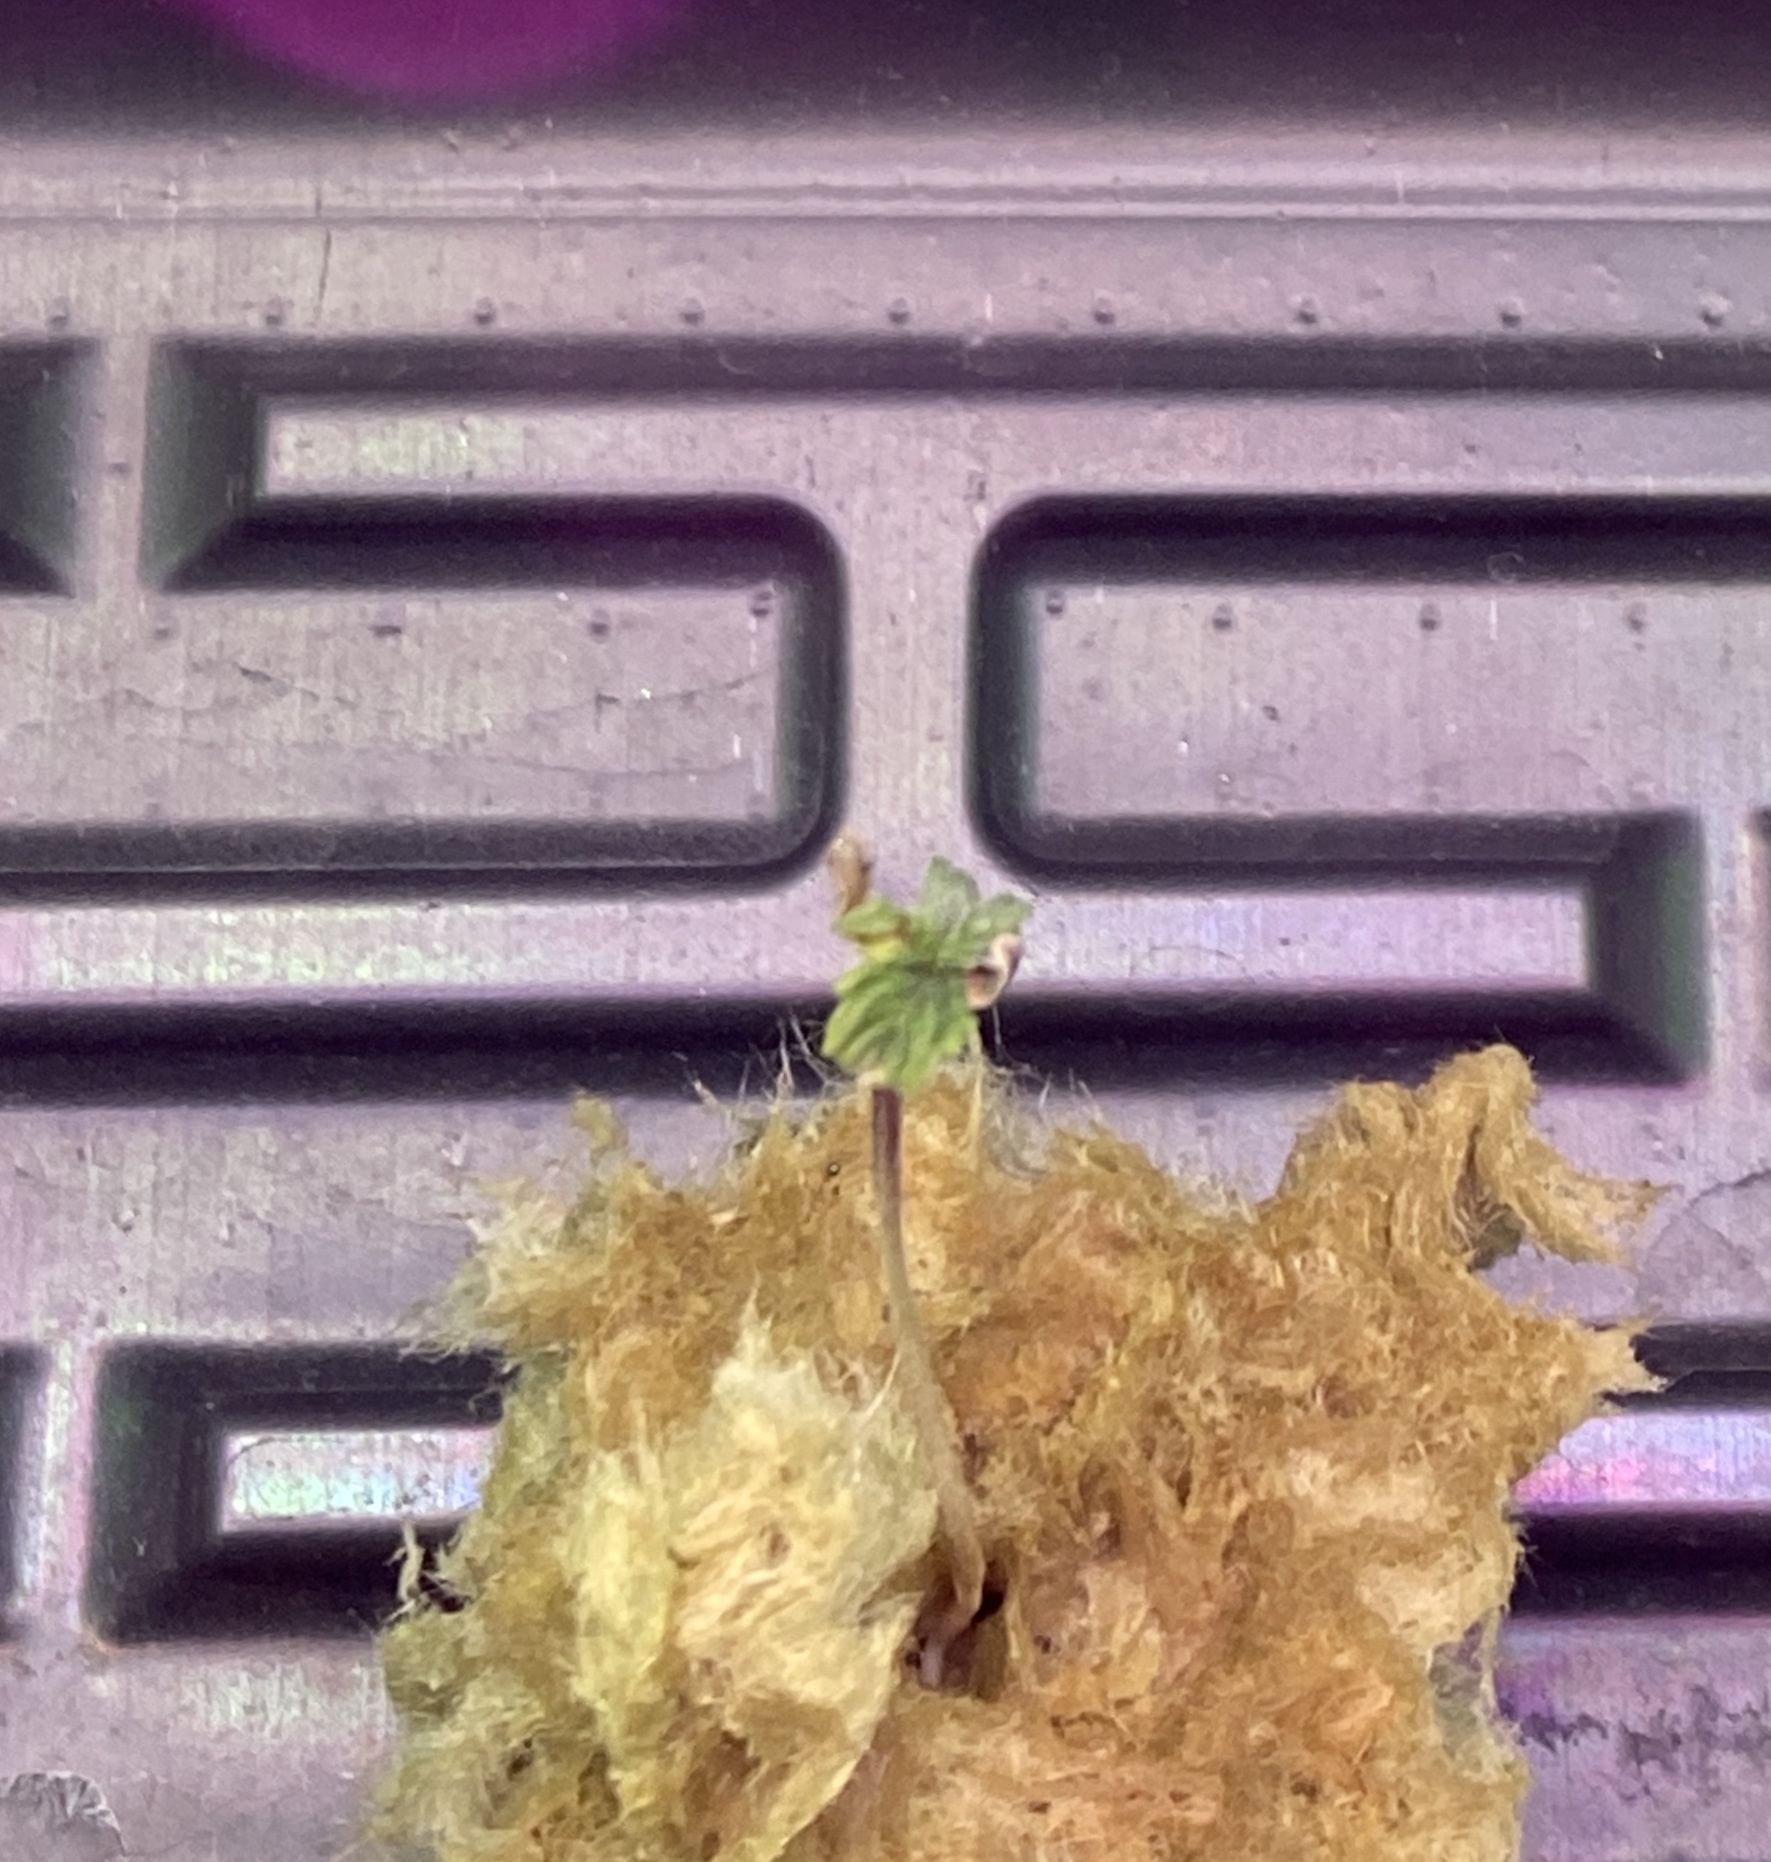 Please help seedlings are 1 week old and are not doing great